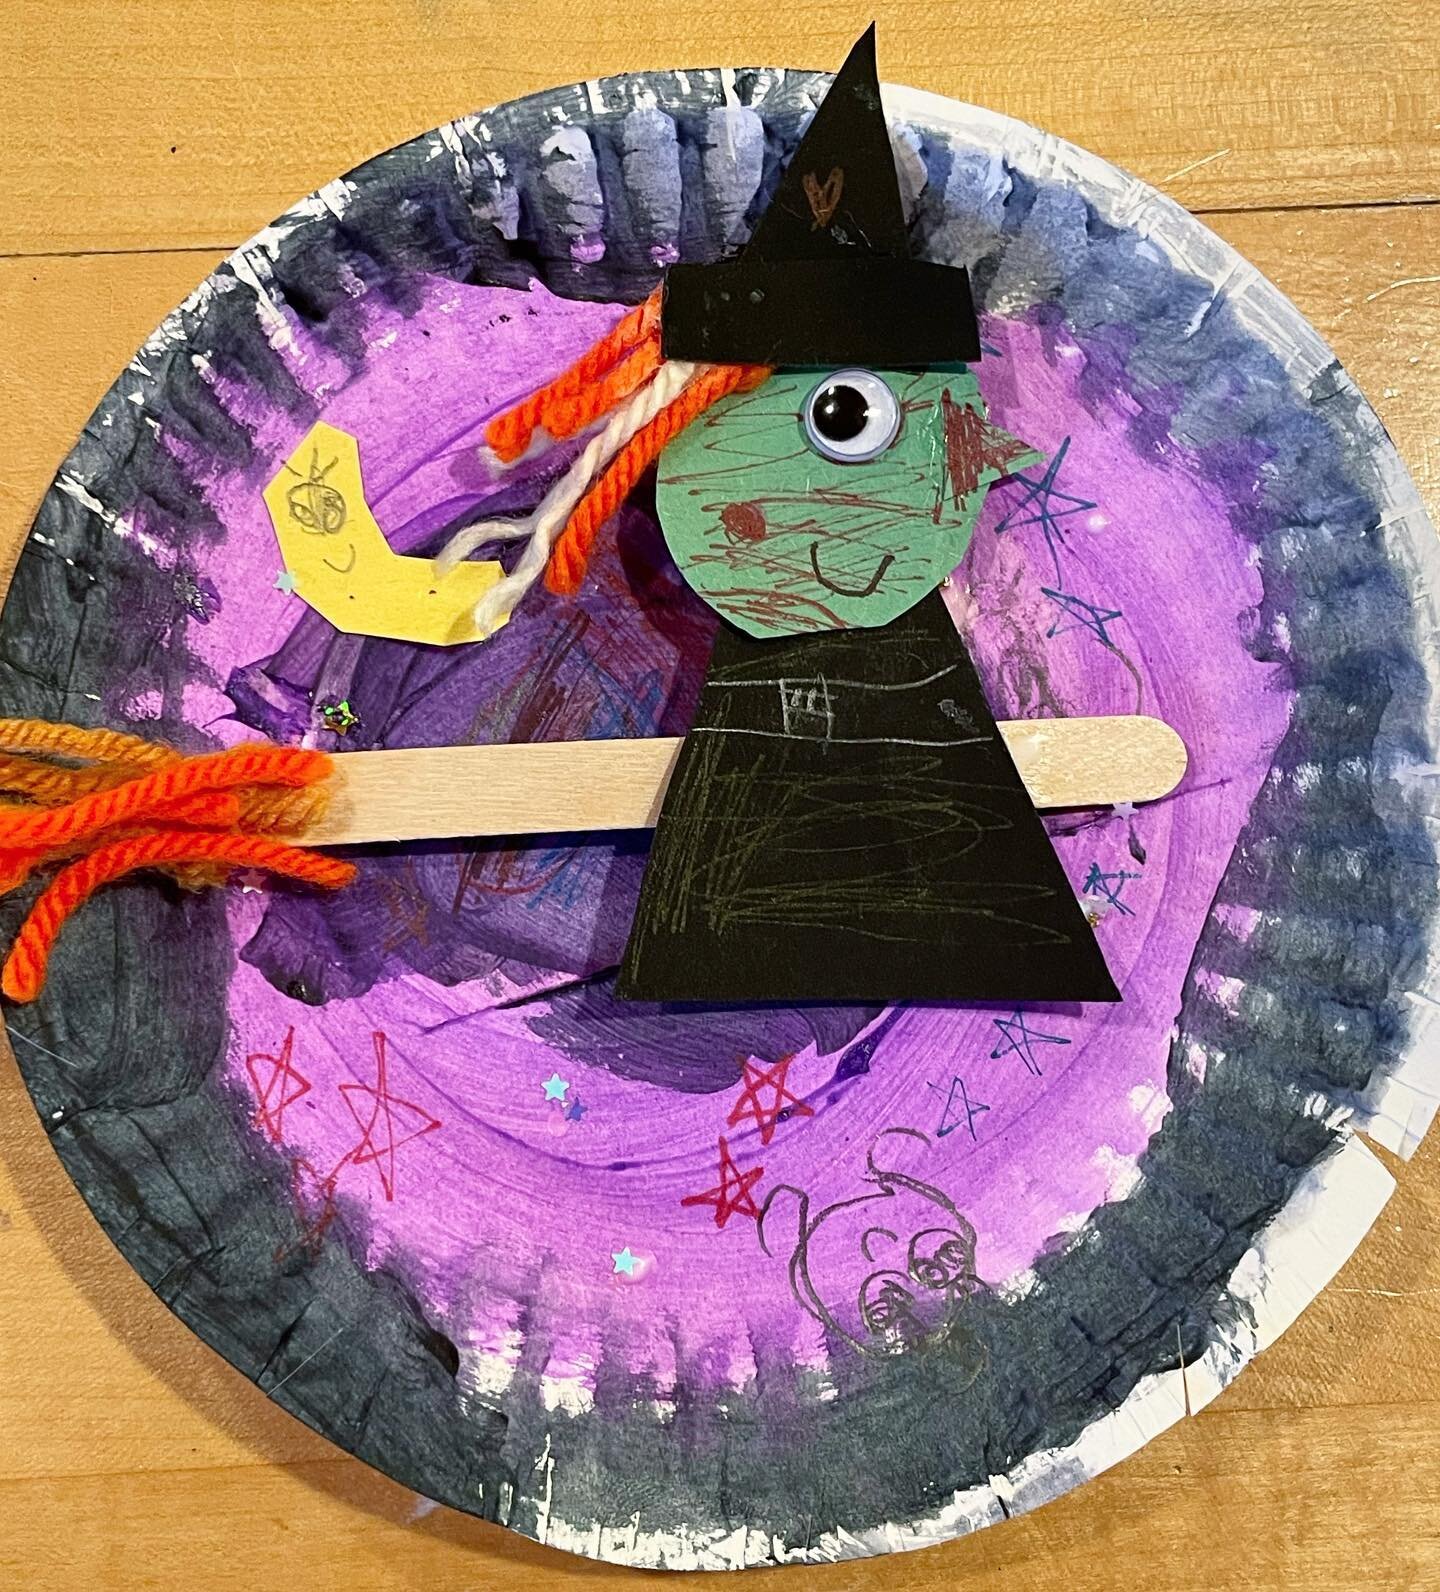 Feeling witchy 🧹✨
By our very talented little student Harper